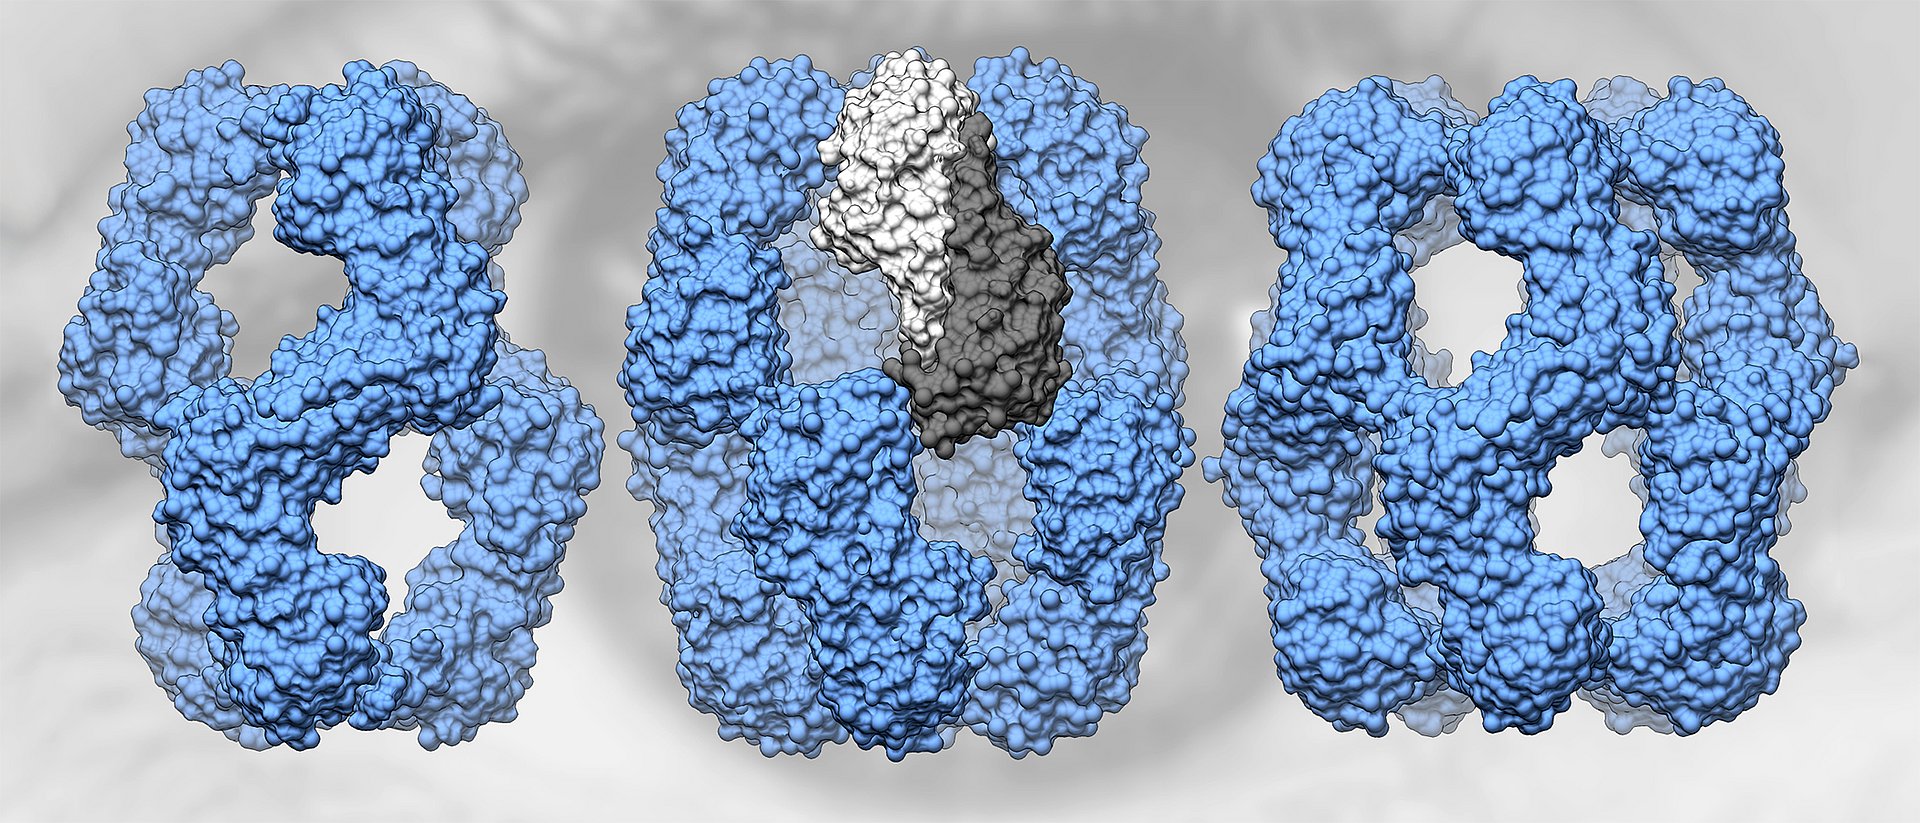 Human αA-crystallin forms structures of 12, 16 and 20 subunits (from left to right). Two subunits (center, dark and light gray) form a dimer.